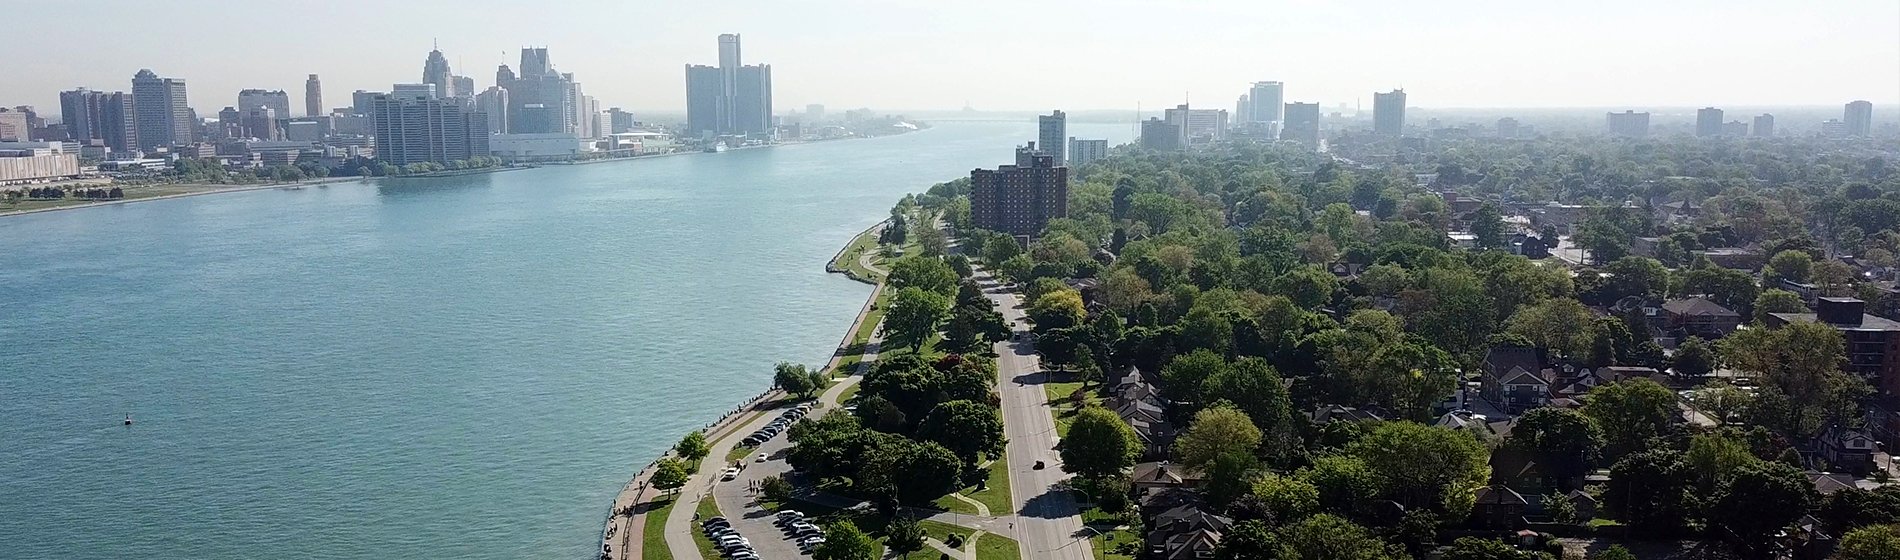 Aerial view of Windsor with Detroit River and city skyline